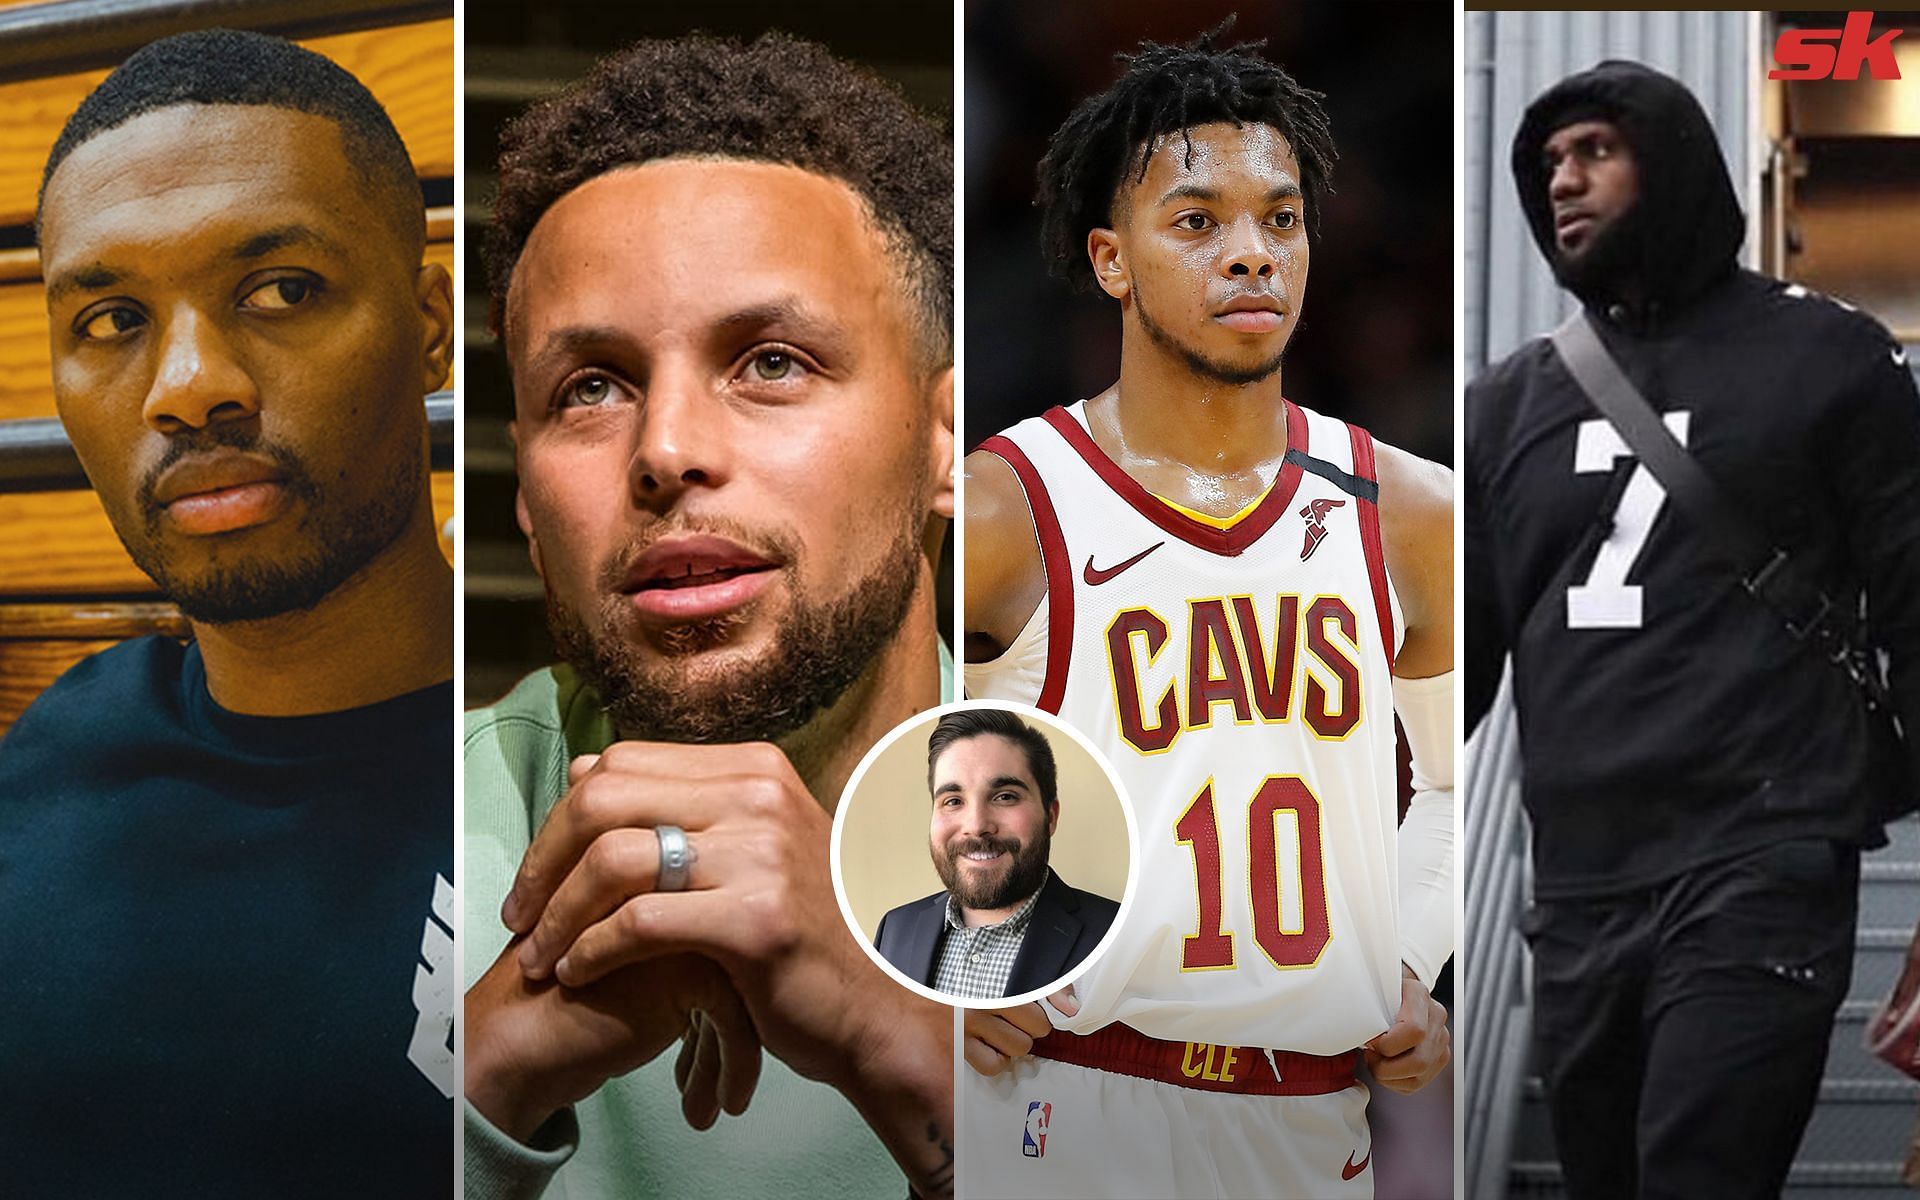 Cleveland Cavaliers guard Darius Garland (10) getting recognized by NBA stars